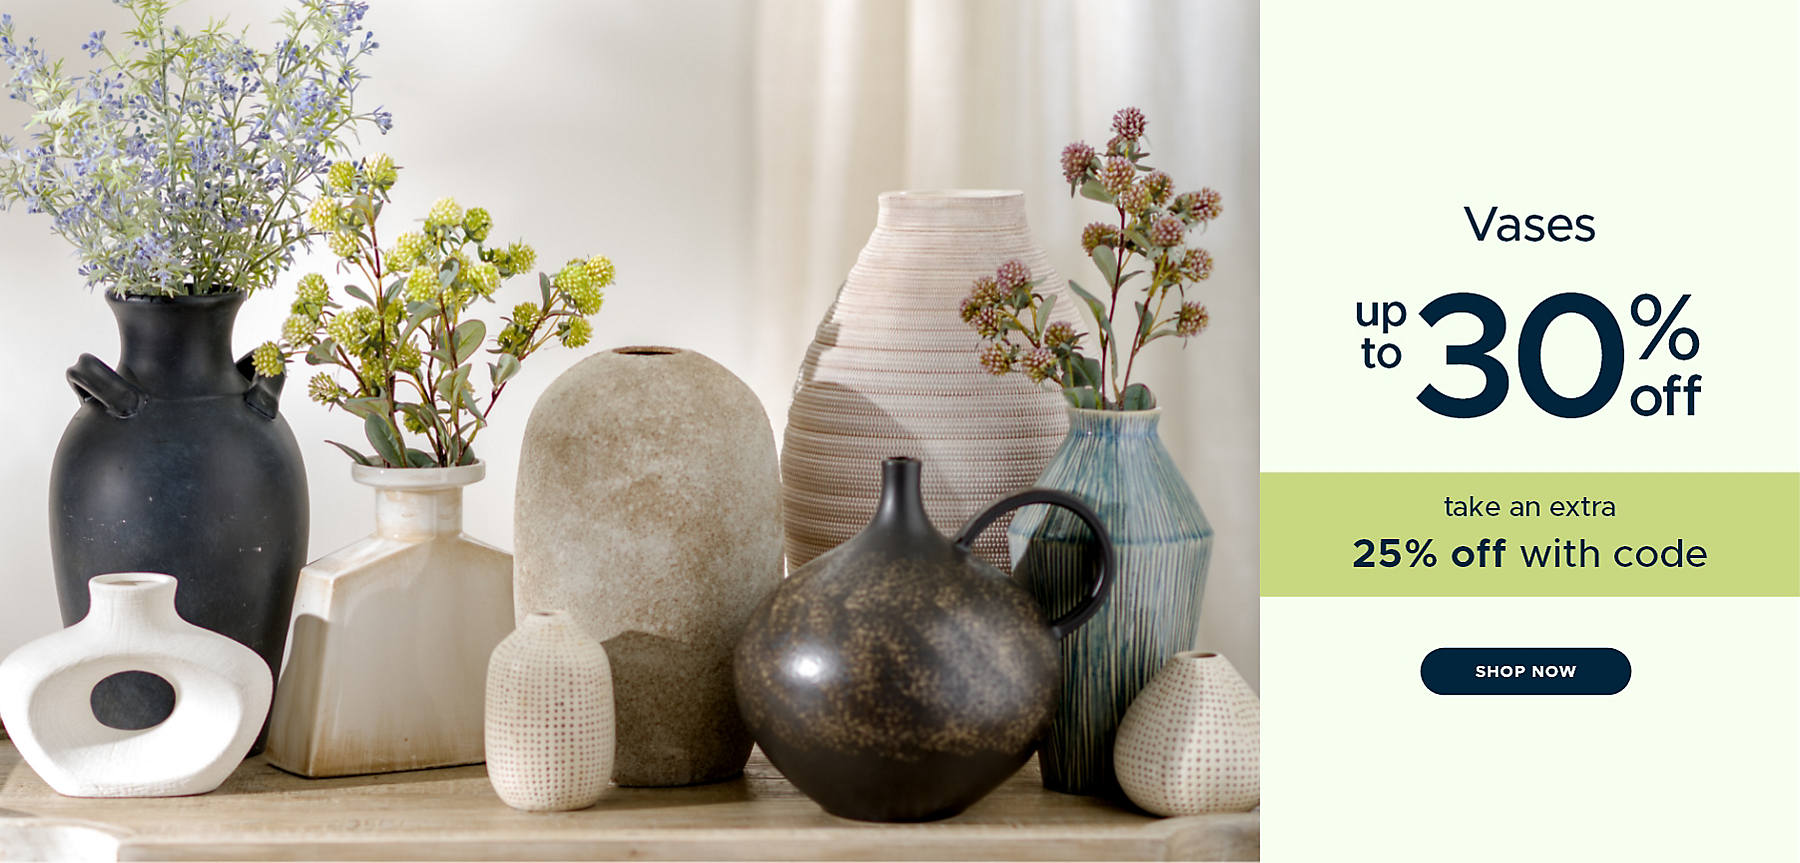 Vases up to 30% off take an extra 25% off with code shop now